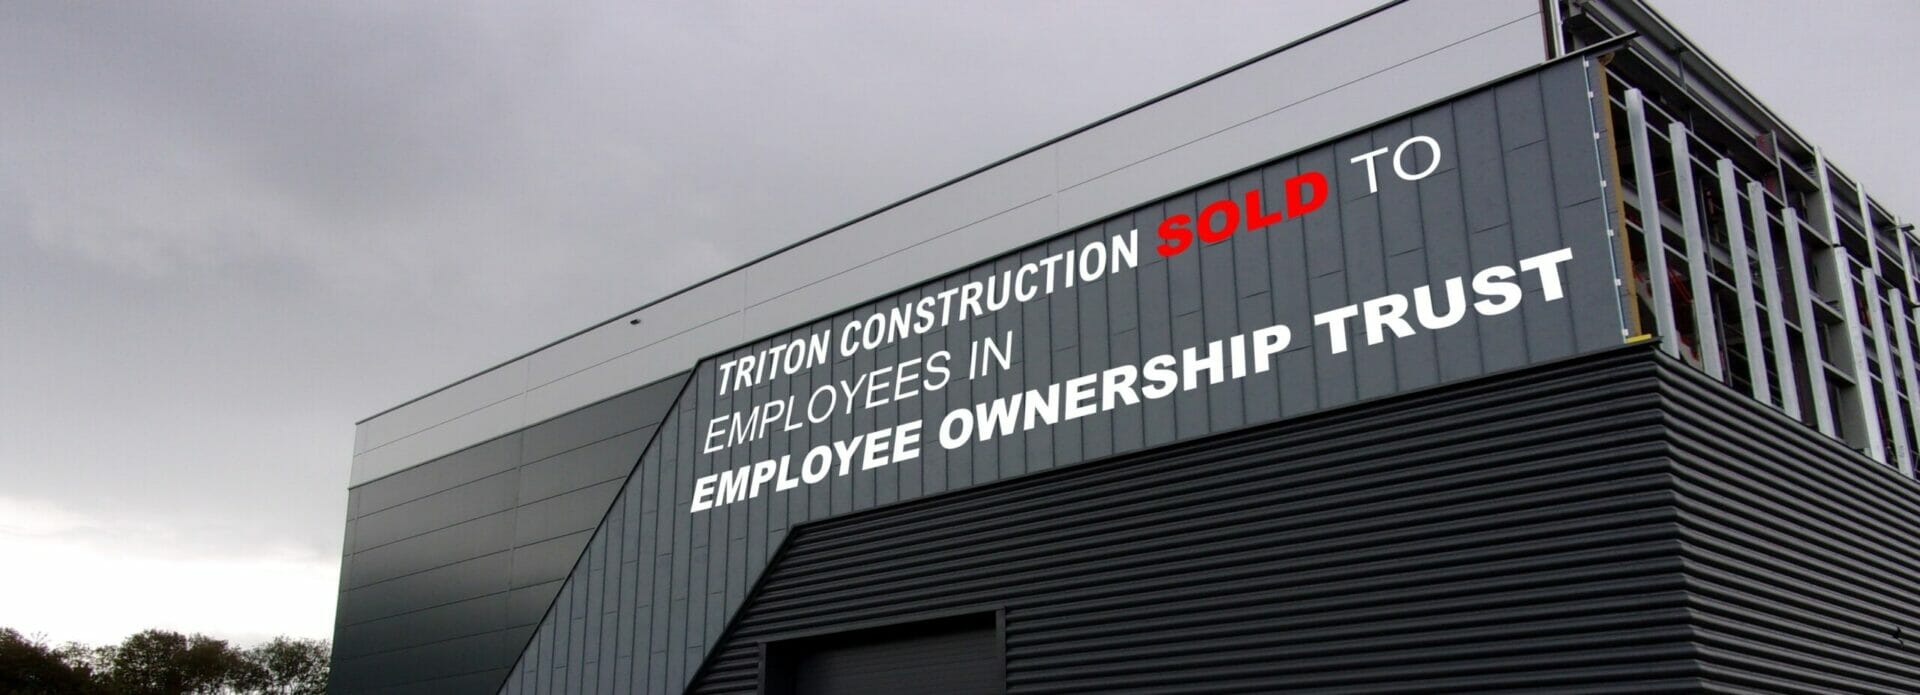 TRITON CONSTRUCTION TRANSFERS BUSINESS OWNERSHIP TO ITS EMPLOYEES